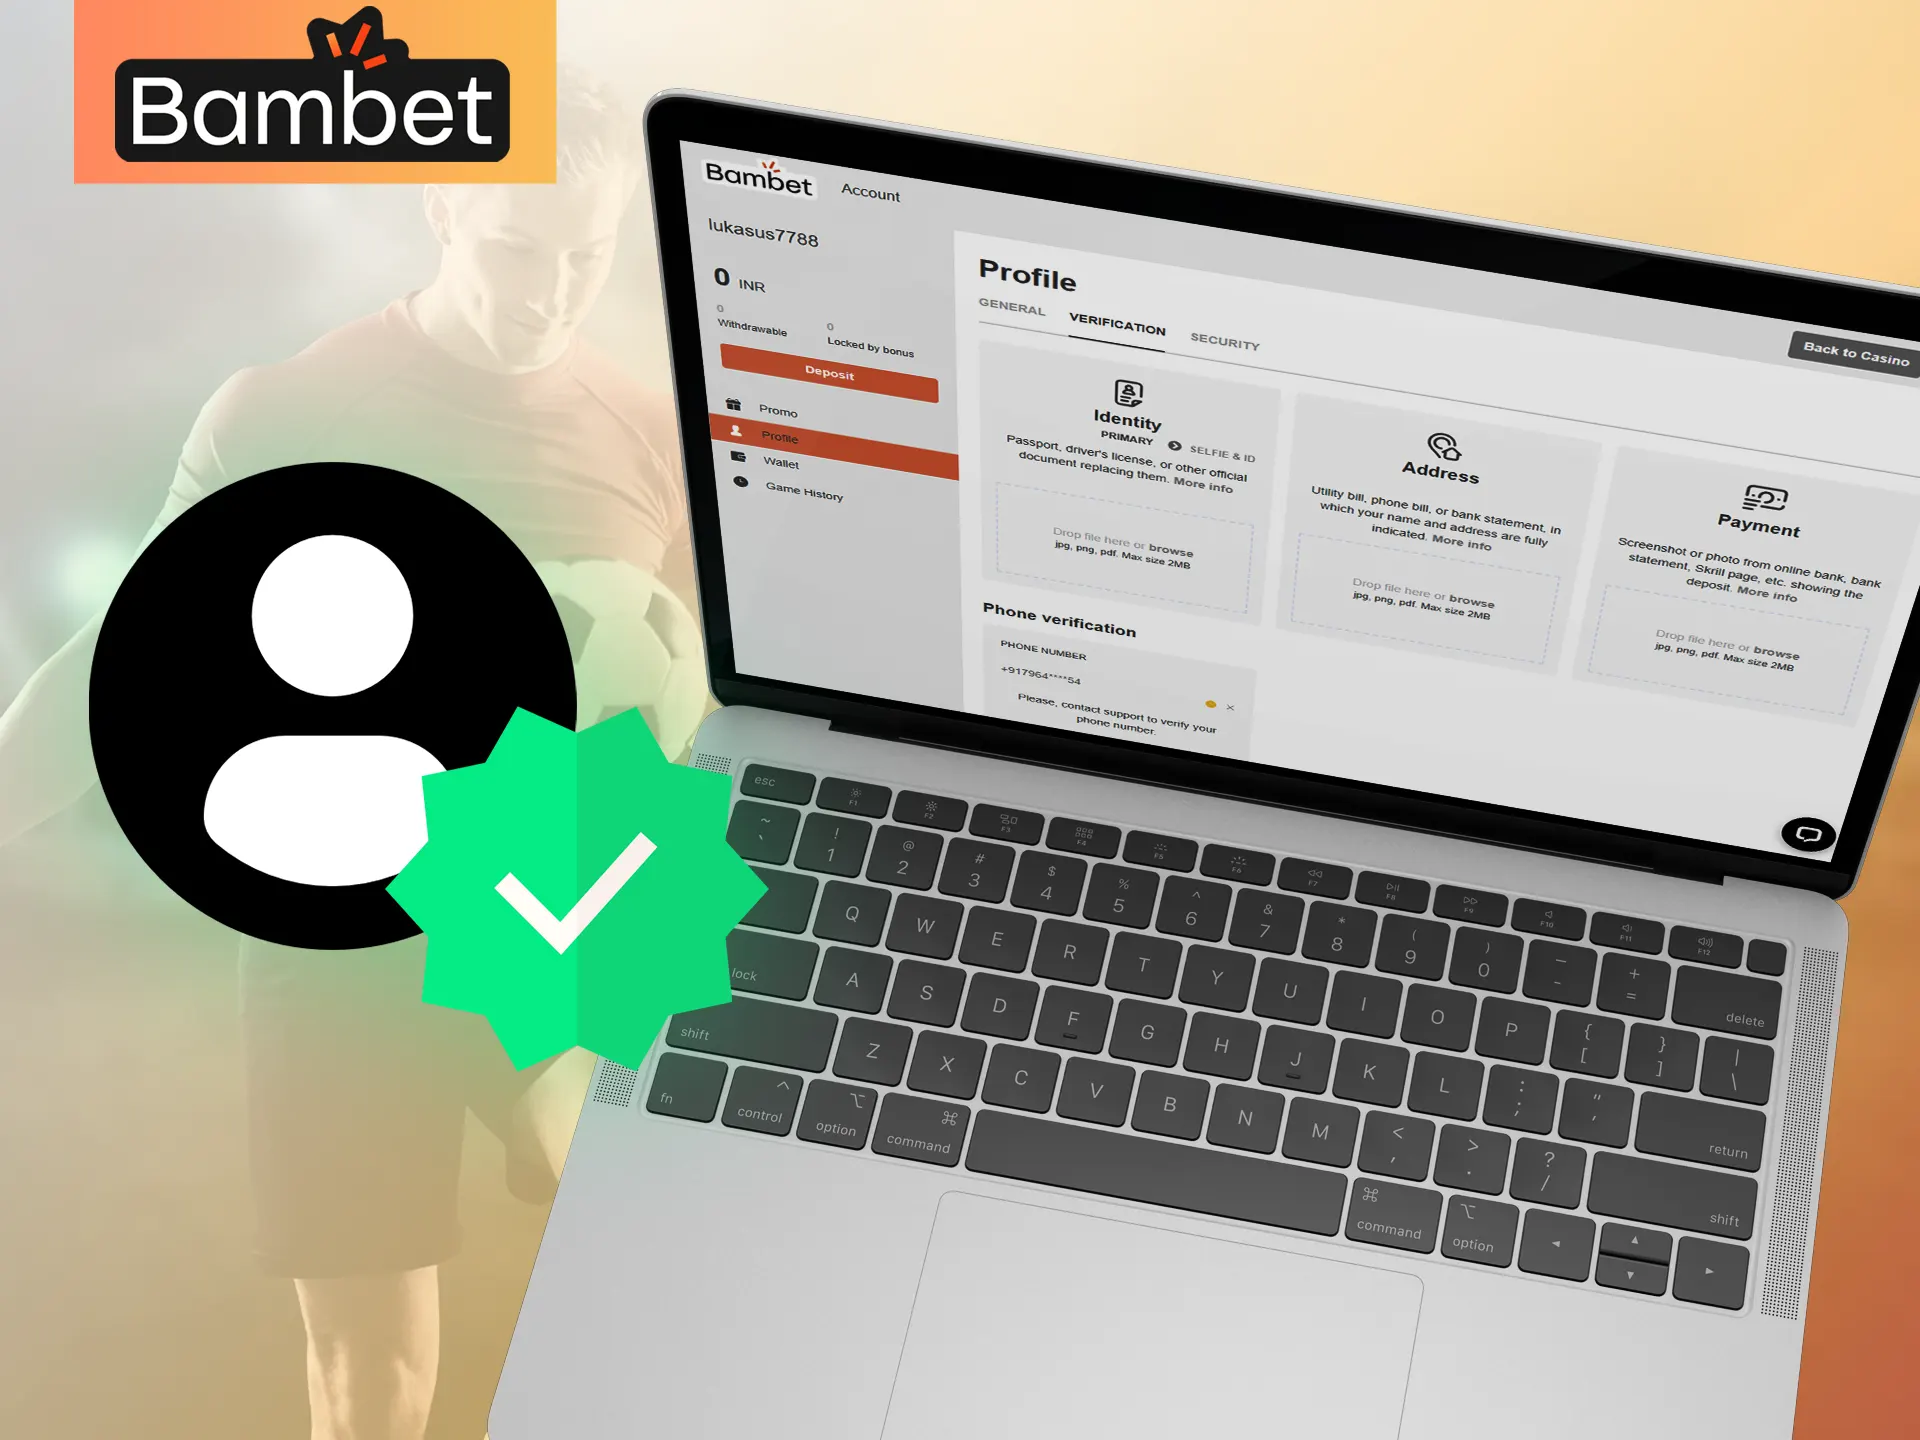 Complete a simple verification at Bambet.